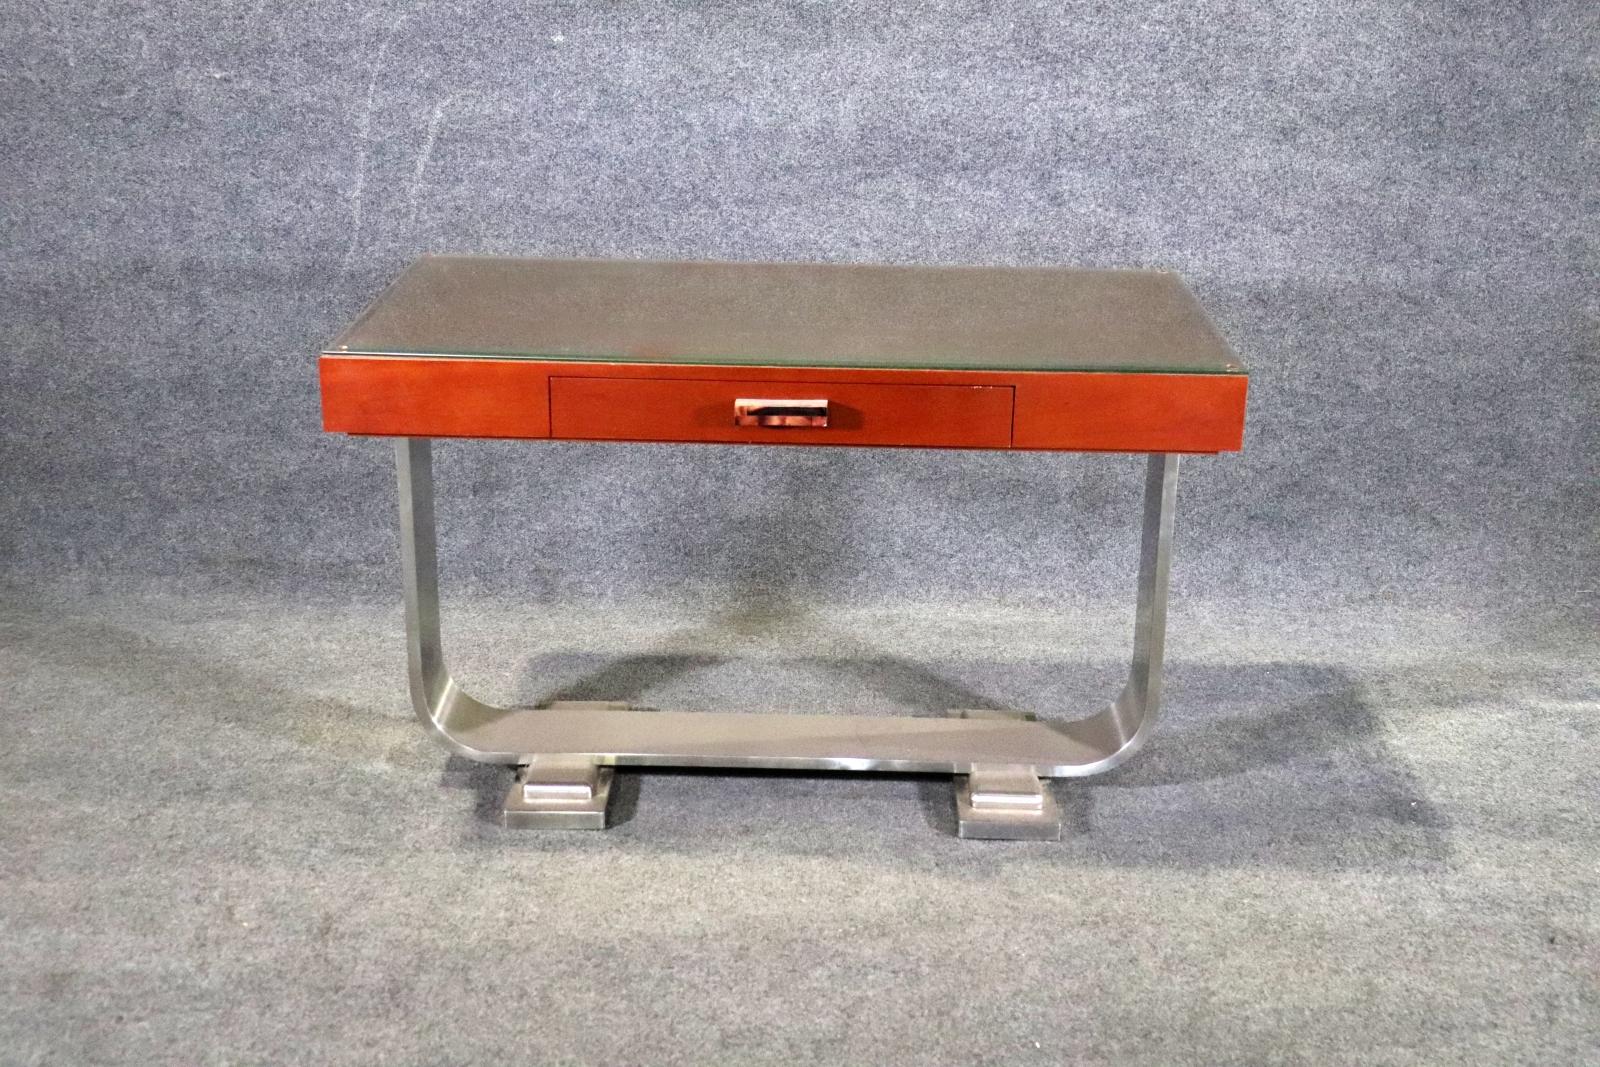 This writing desk features a leather top with glass protector on an aluminum base. Single drawer with decorative acrylic handle. Can also be used as a console table.
Please confirm location NY or NJ